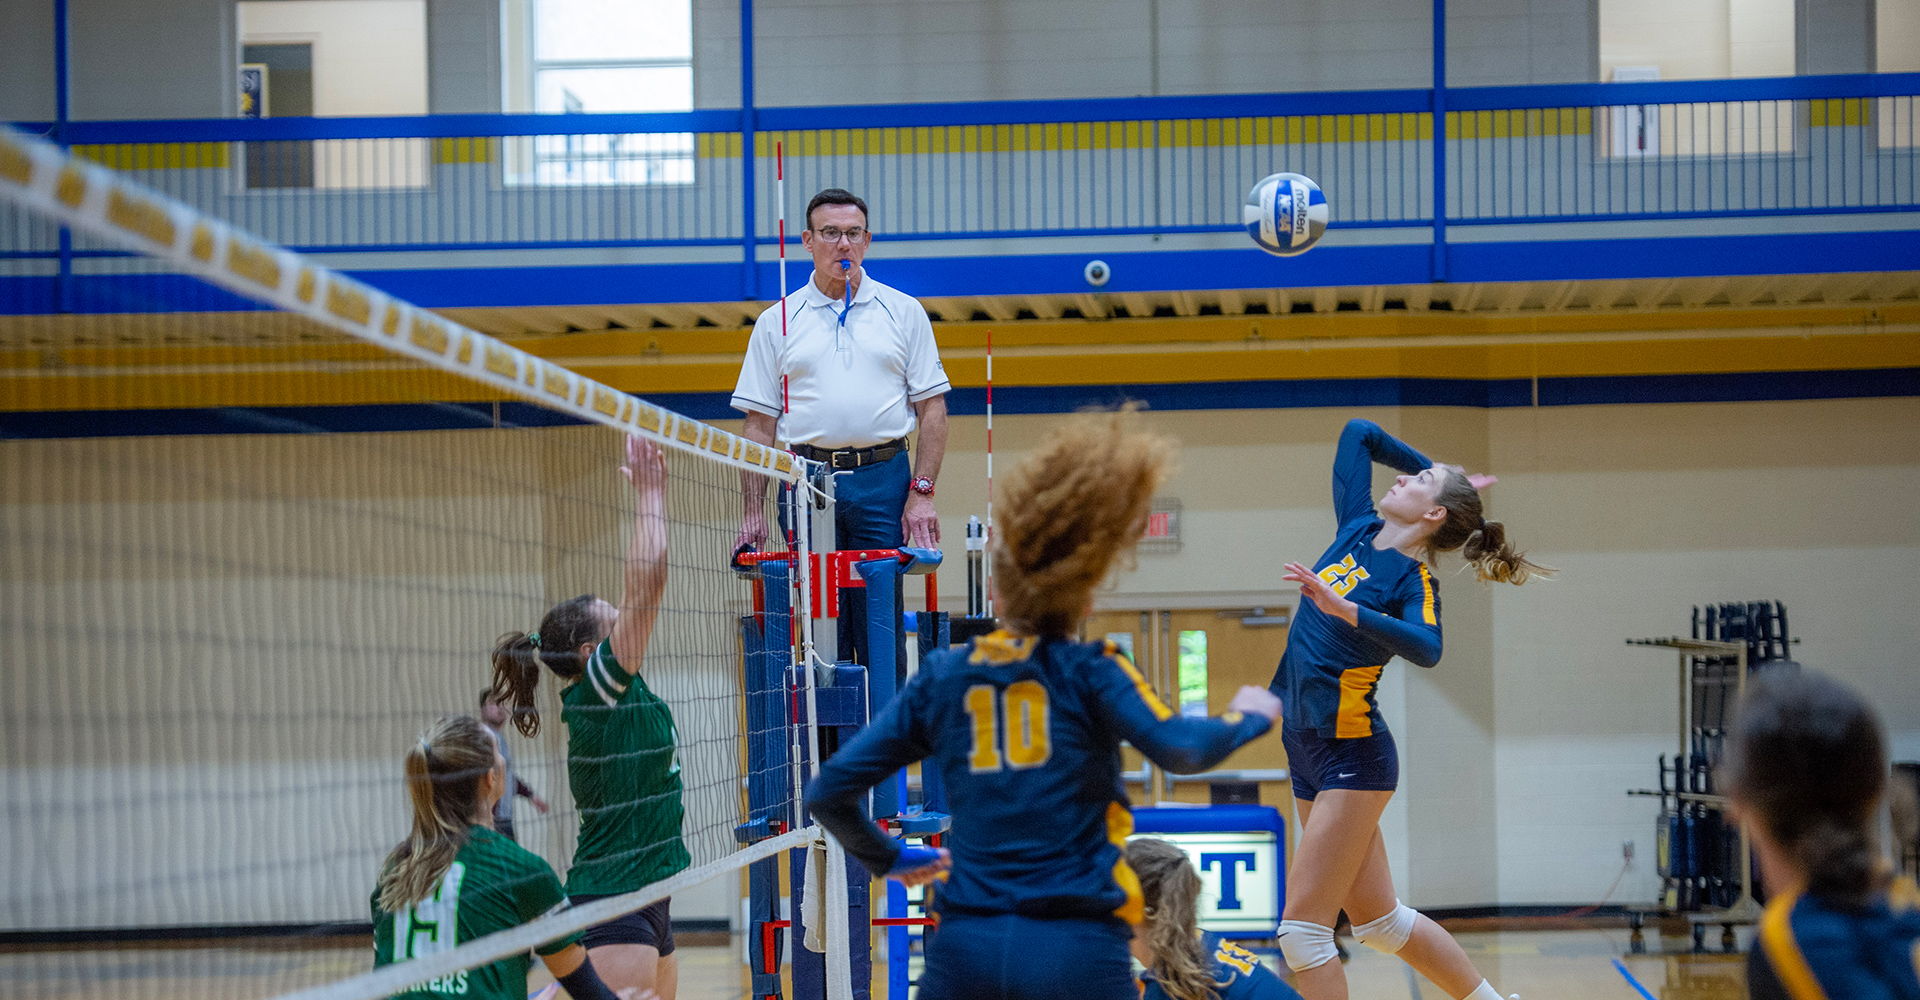 MSJ volleyball player spiking ball over net at msj gym.